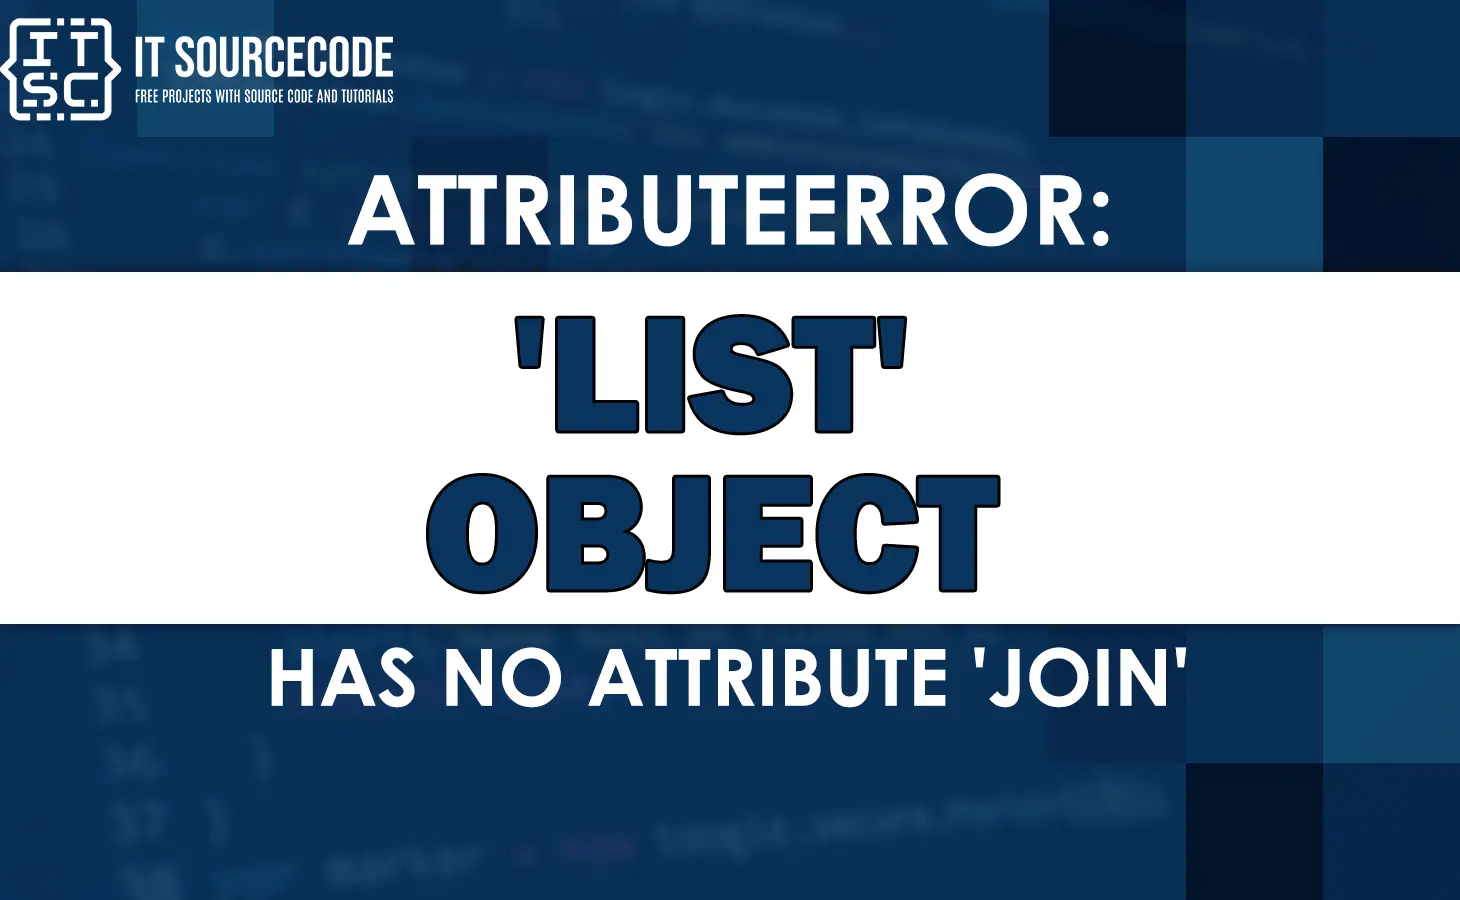 Attributeerror ‘list’ object has no attribute ‘join’